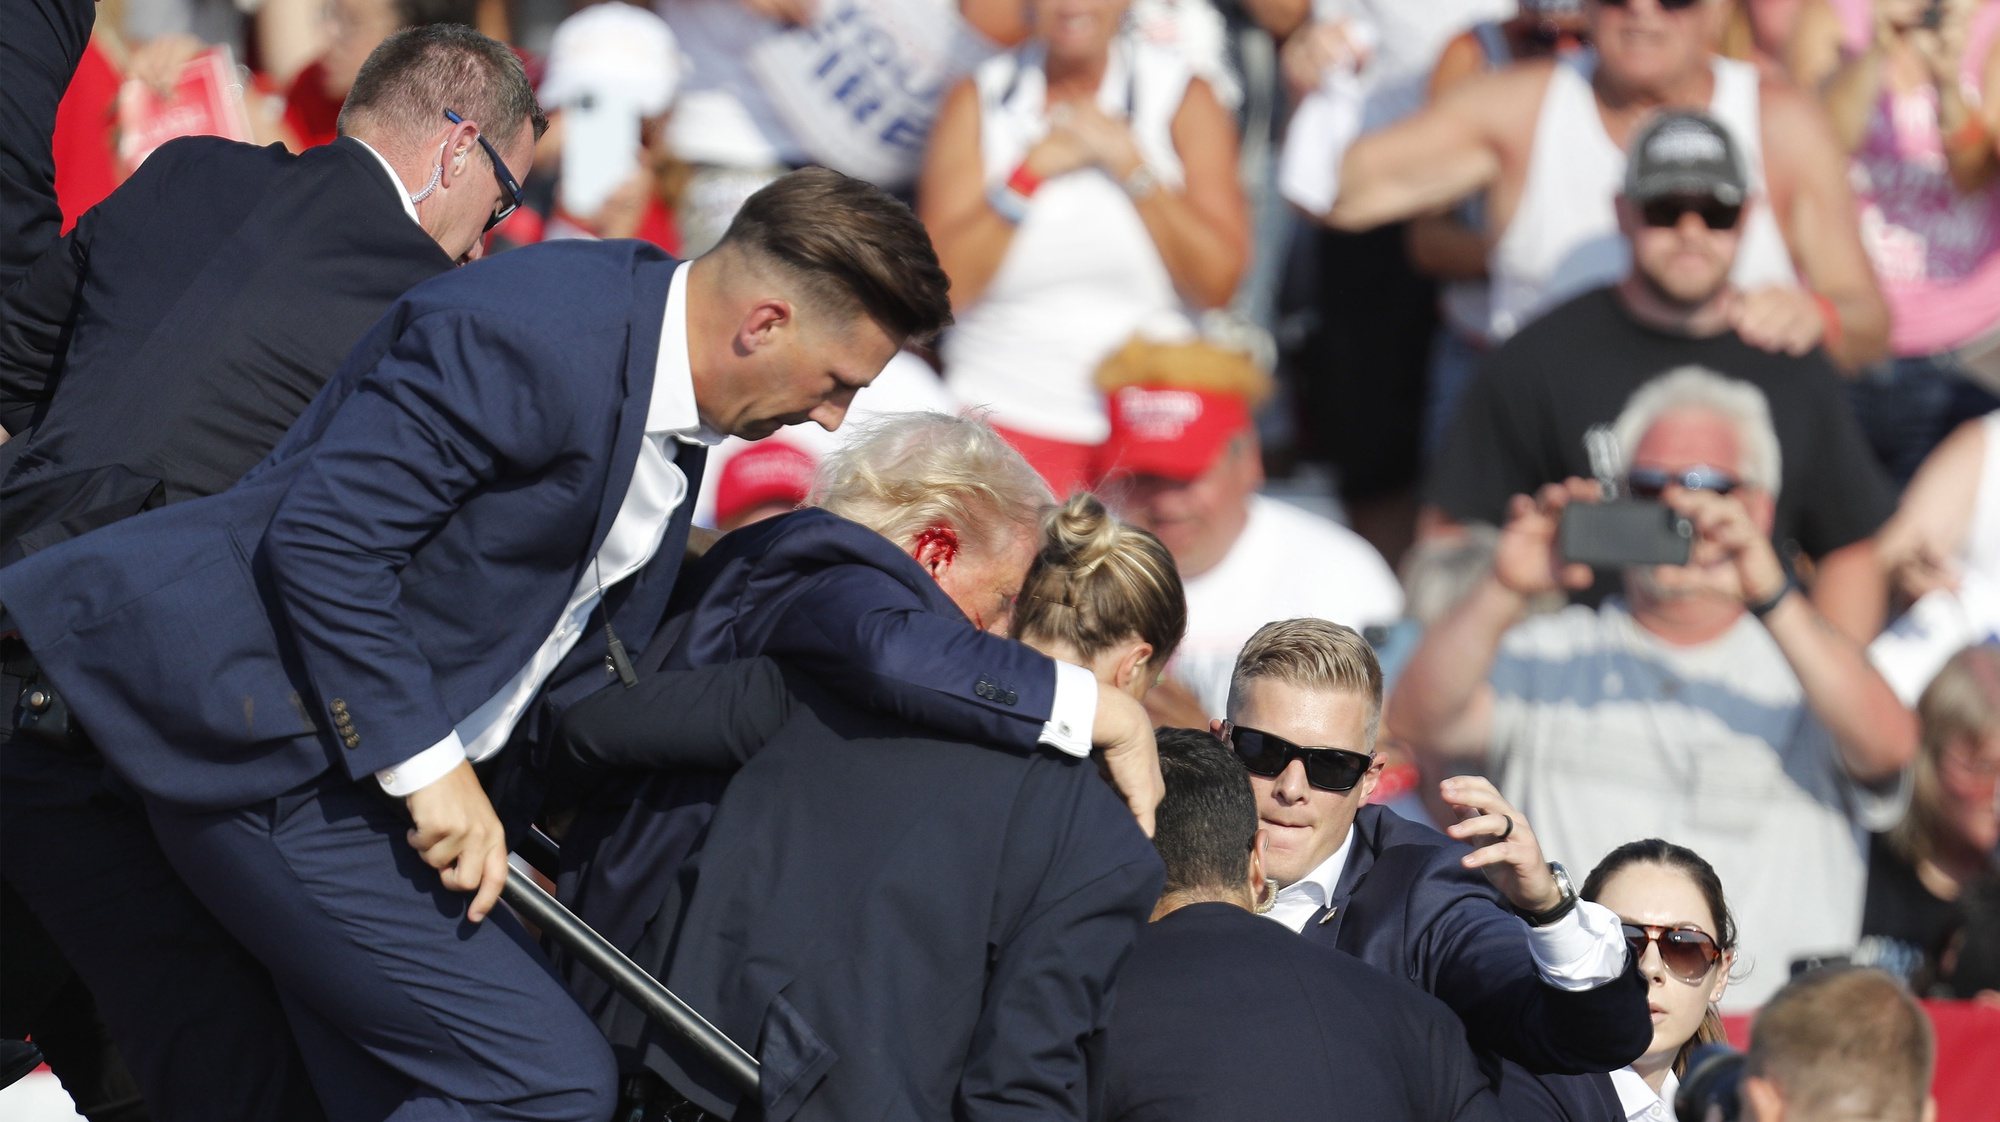 epa11476773 Former US President Donald Trump is rushed from the stage by secret service after an incident during a campaign rally at the Butler Farm Show Inc. in Butler, Pennsylvania, USA, 13 July 2024. According to a statement by a secret service spokesperson, the former President is safe and further information on the incident will be released when available.  EPA/DAVID MAXWELL